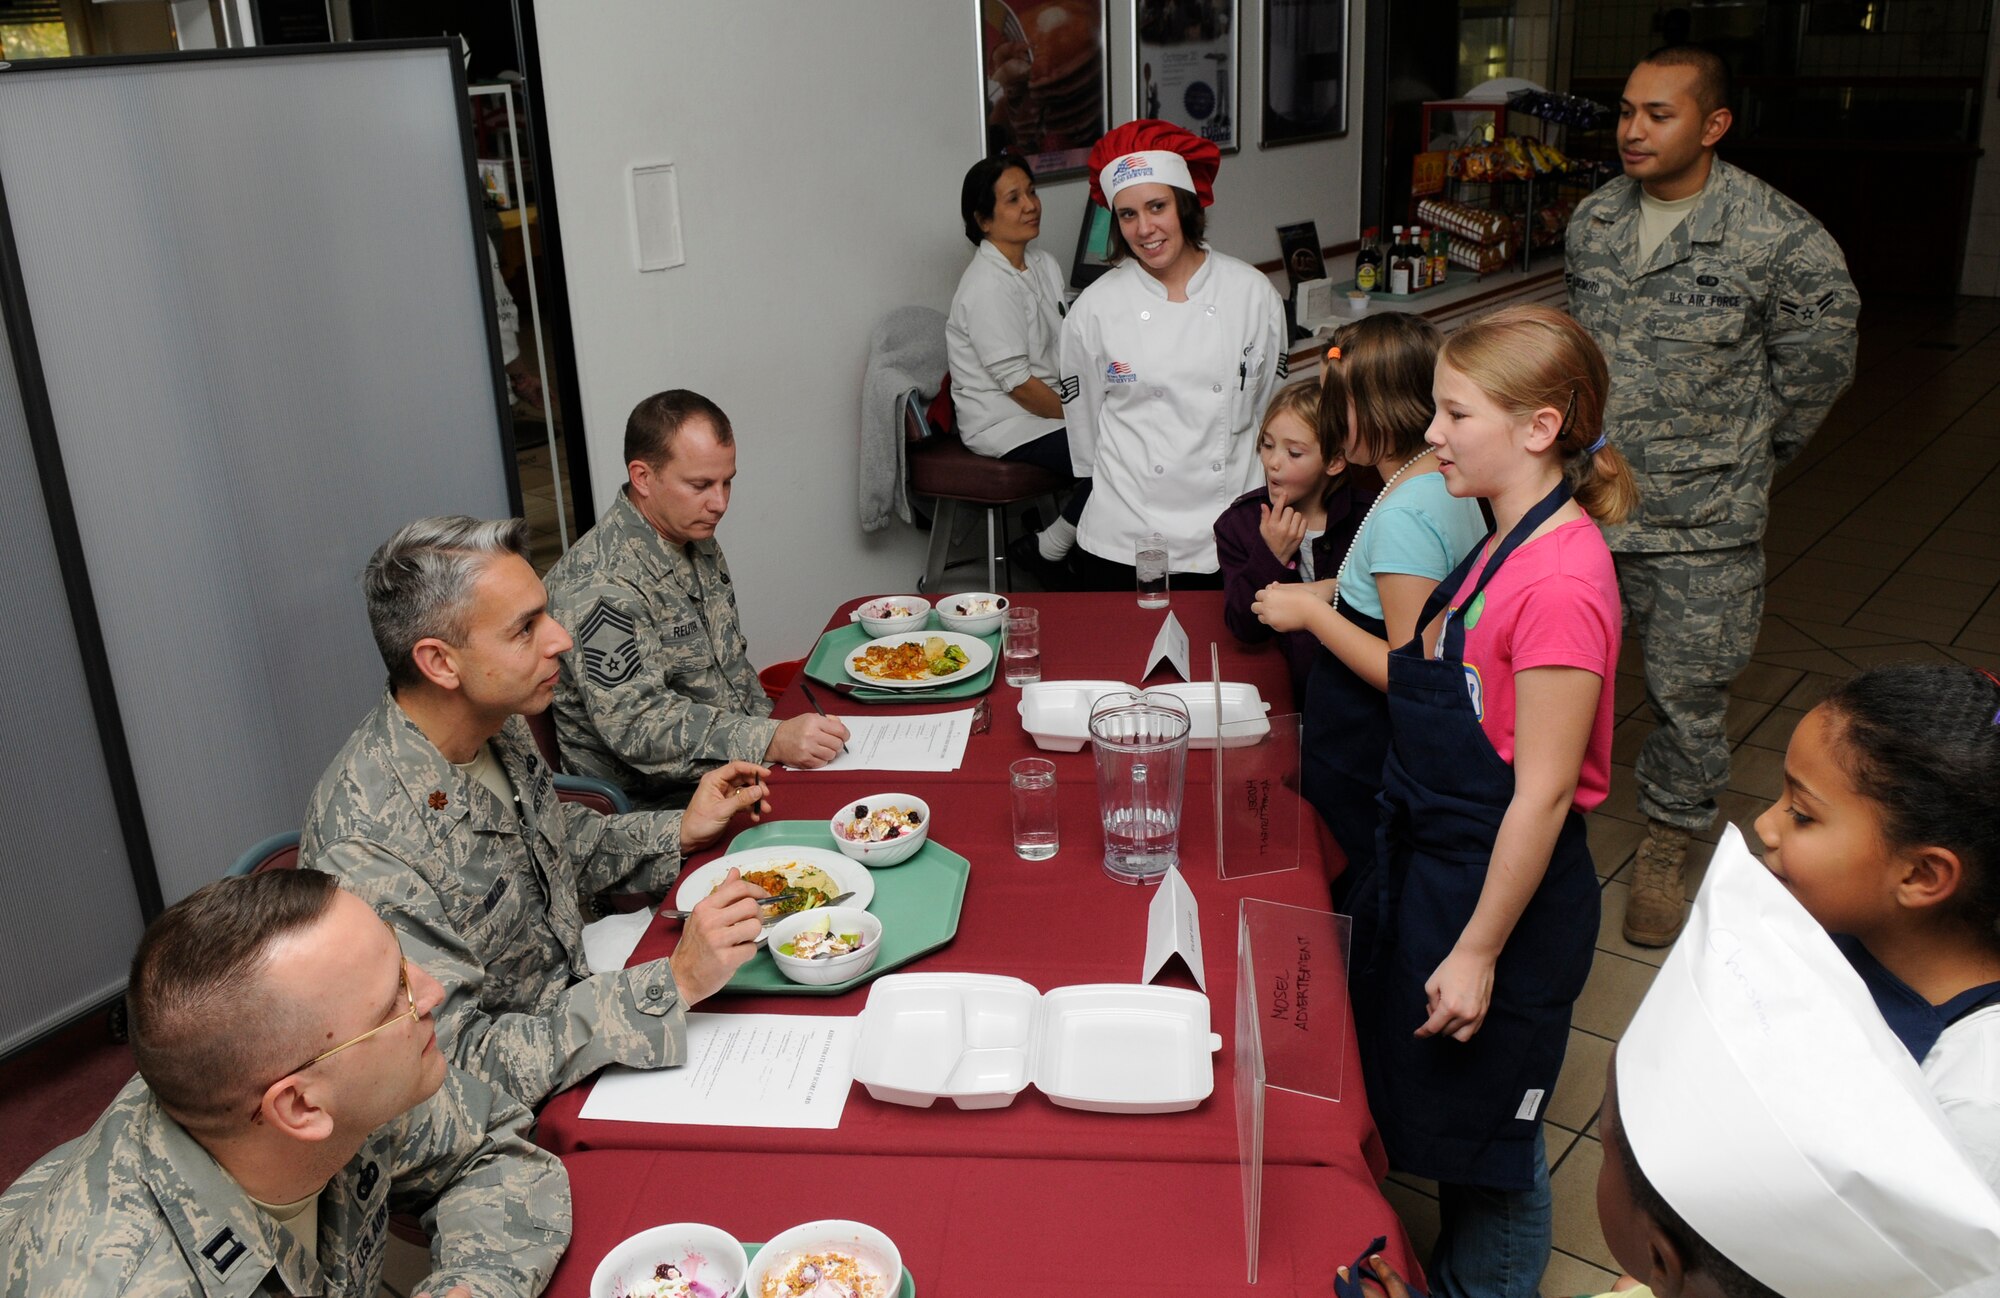 SPANGDAHLEM AIR BASE, Germany – The Kid’s Iron Chef Competition judges ask students from team one questions about their dish Oct. 20. Students from the Spangdahlem Middle School were split into three teams, and each team created a different dish to be judged. (U.S. Air Force photo/Airman 1st Class Staci Miller)